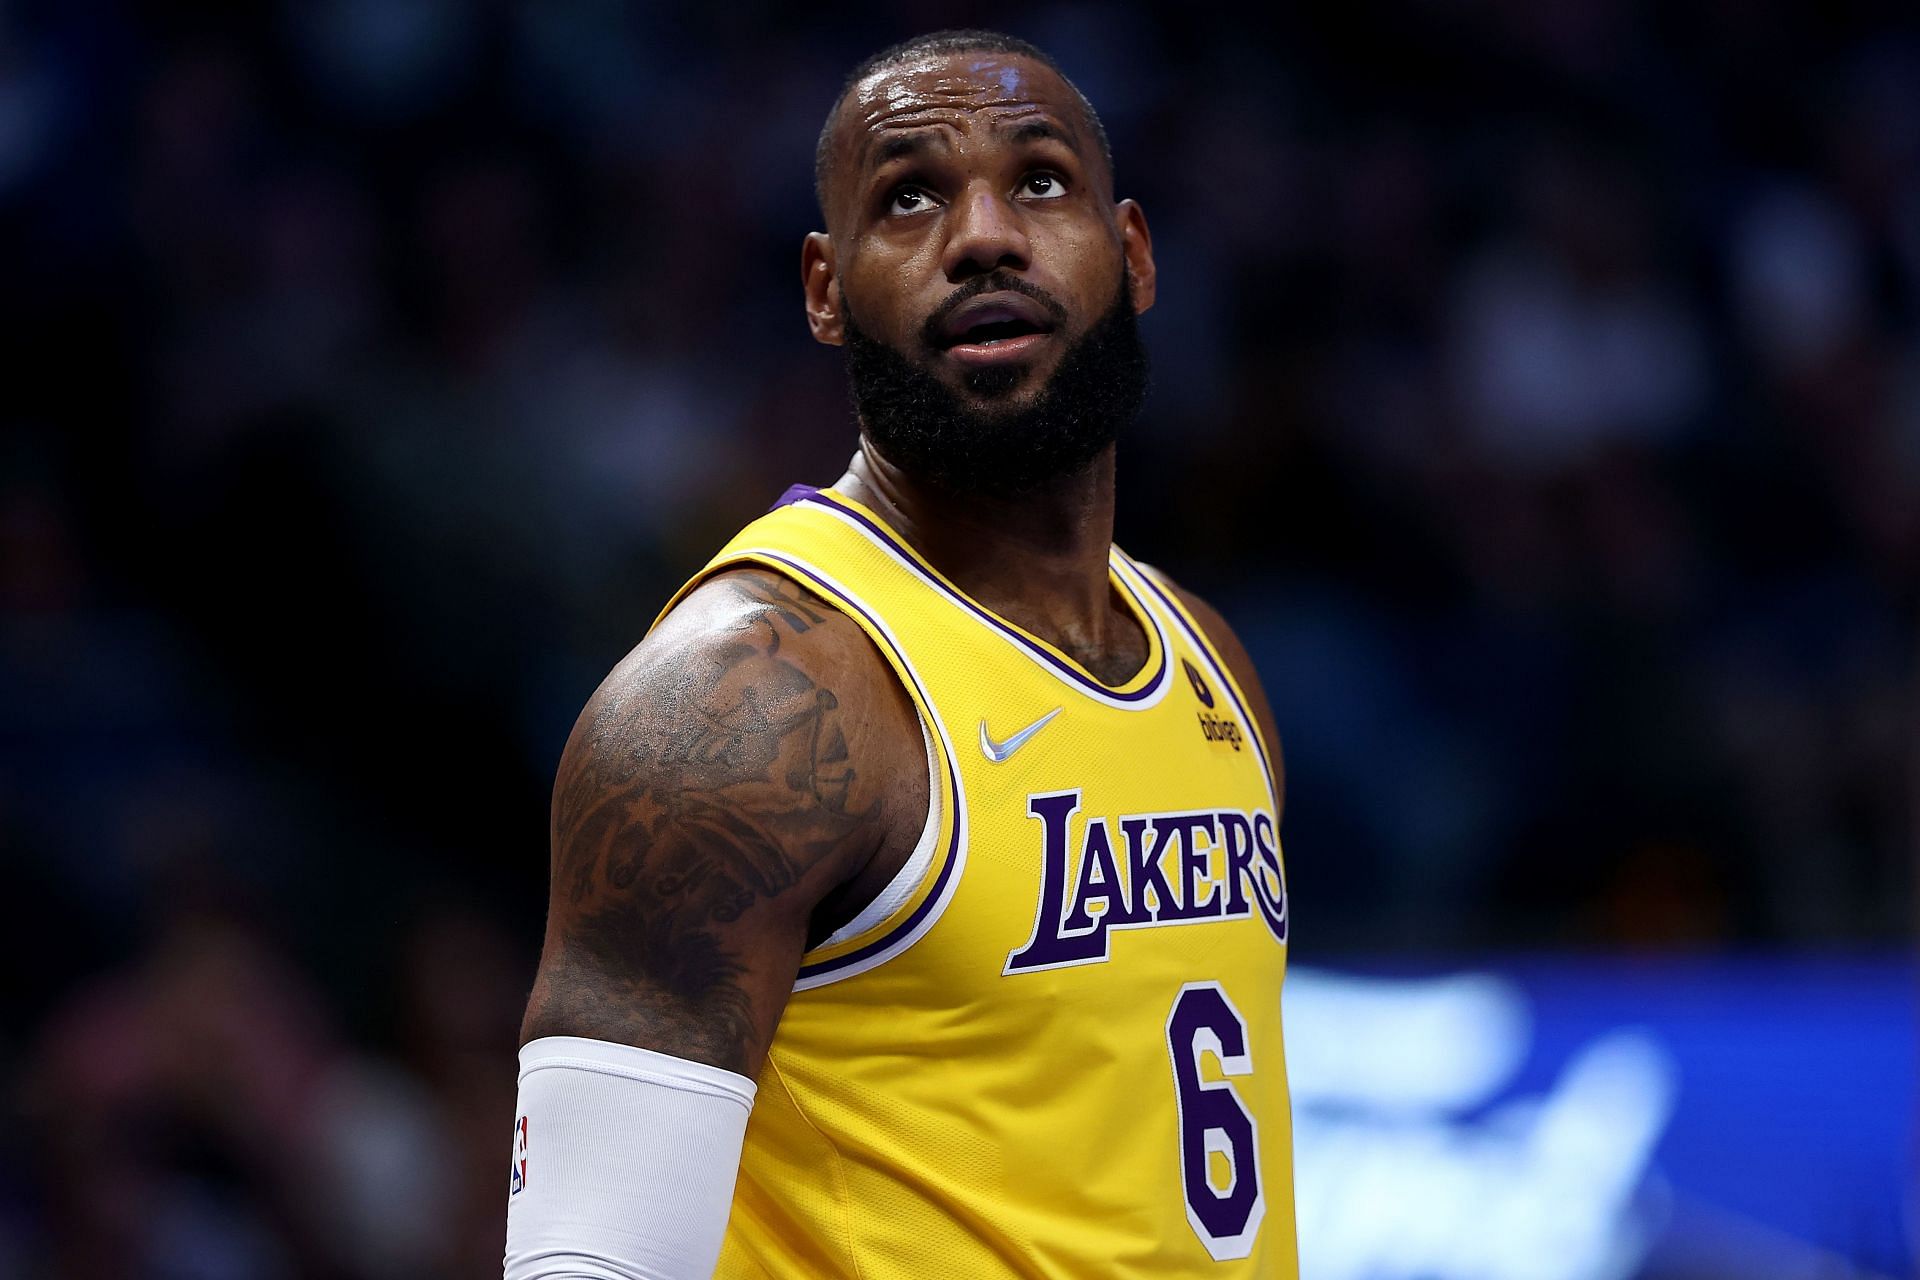 Los Angeles Lakers superstar forward LeBron James is listed as probable for tonight